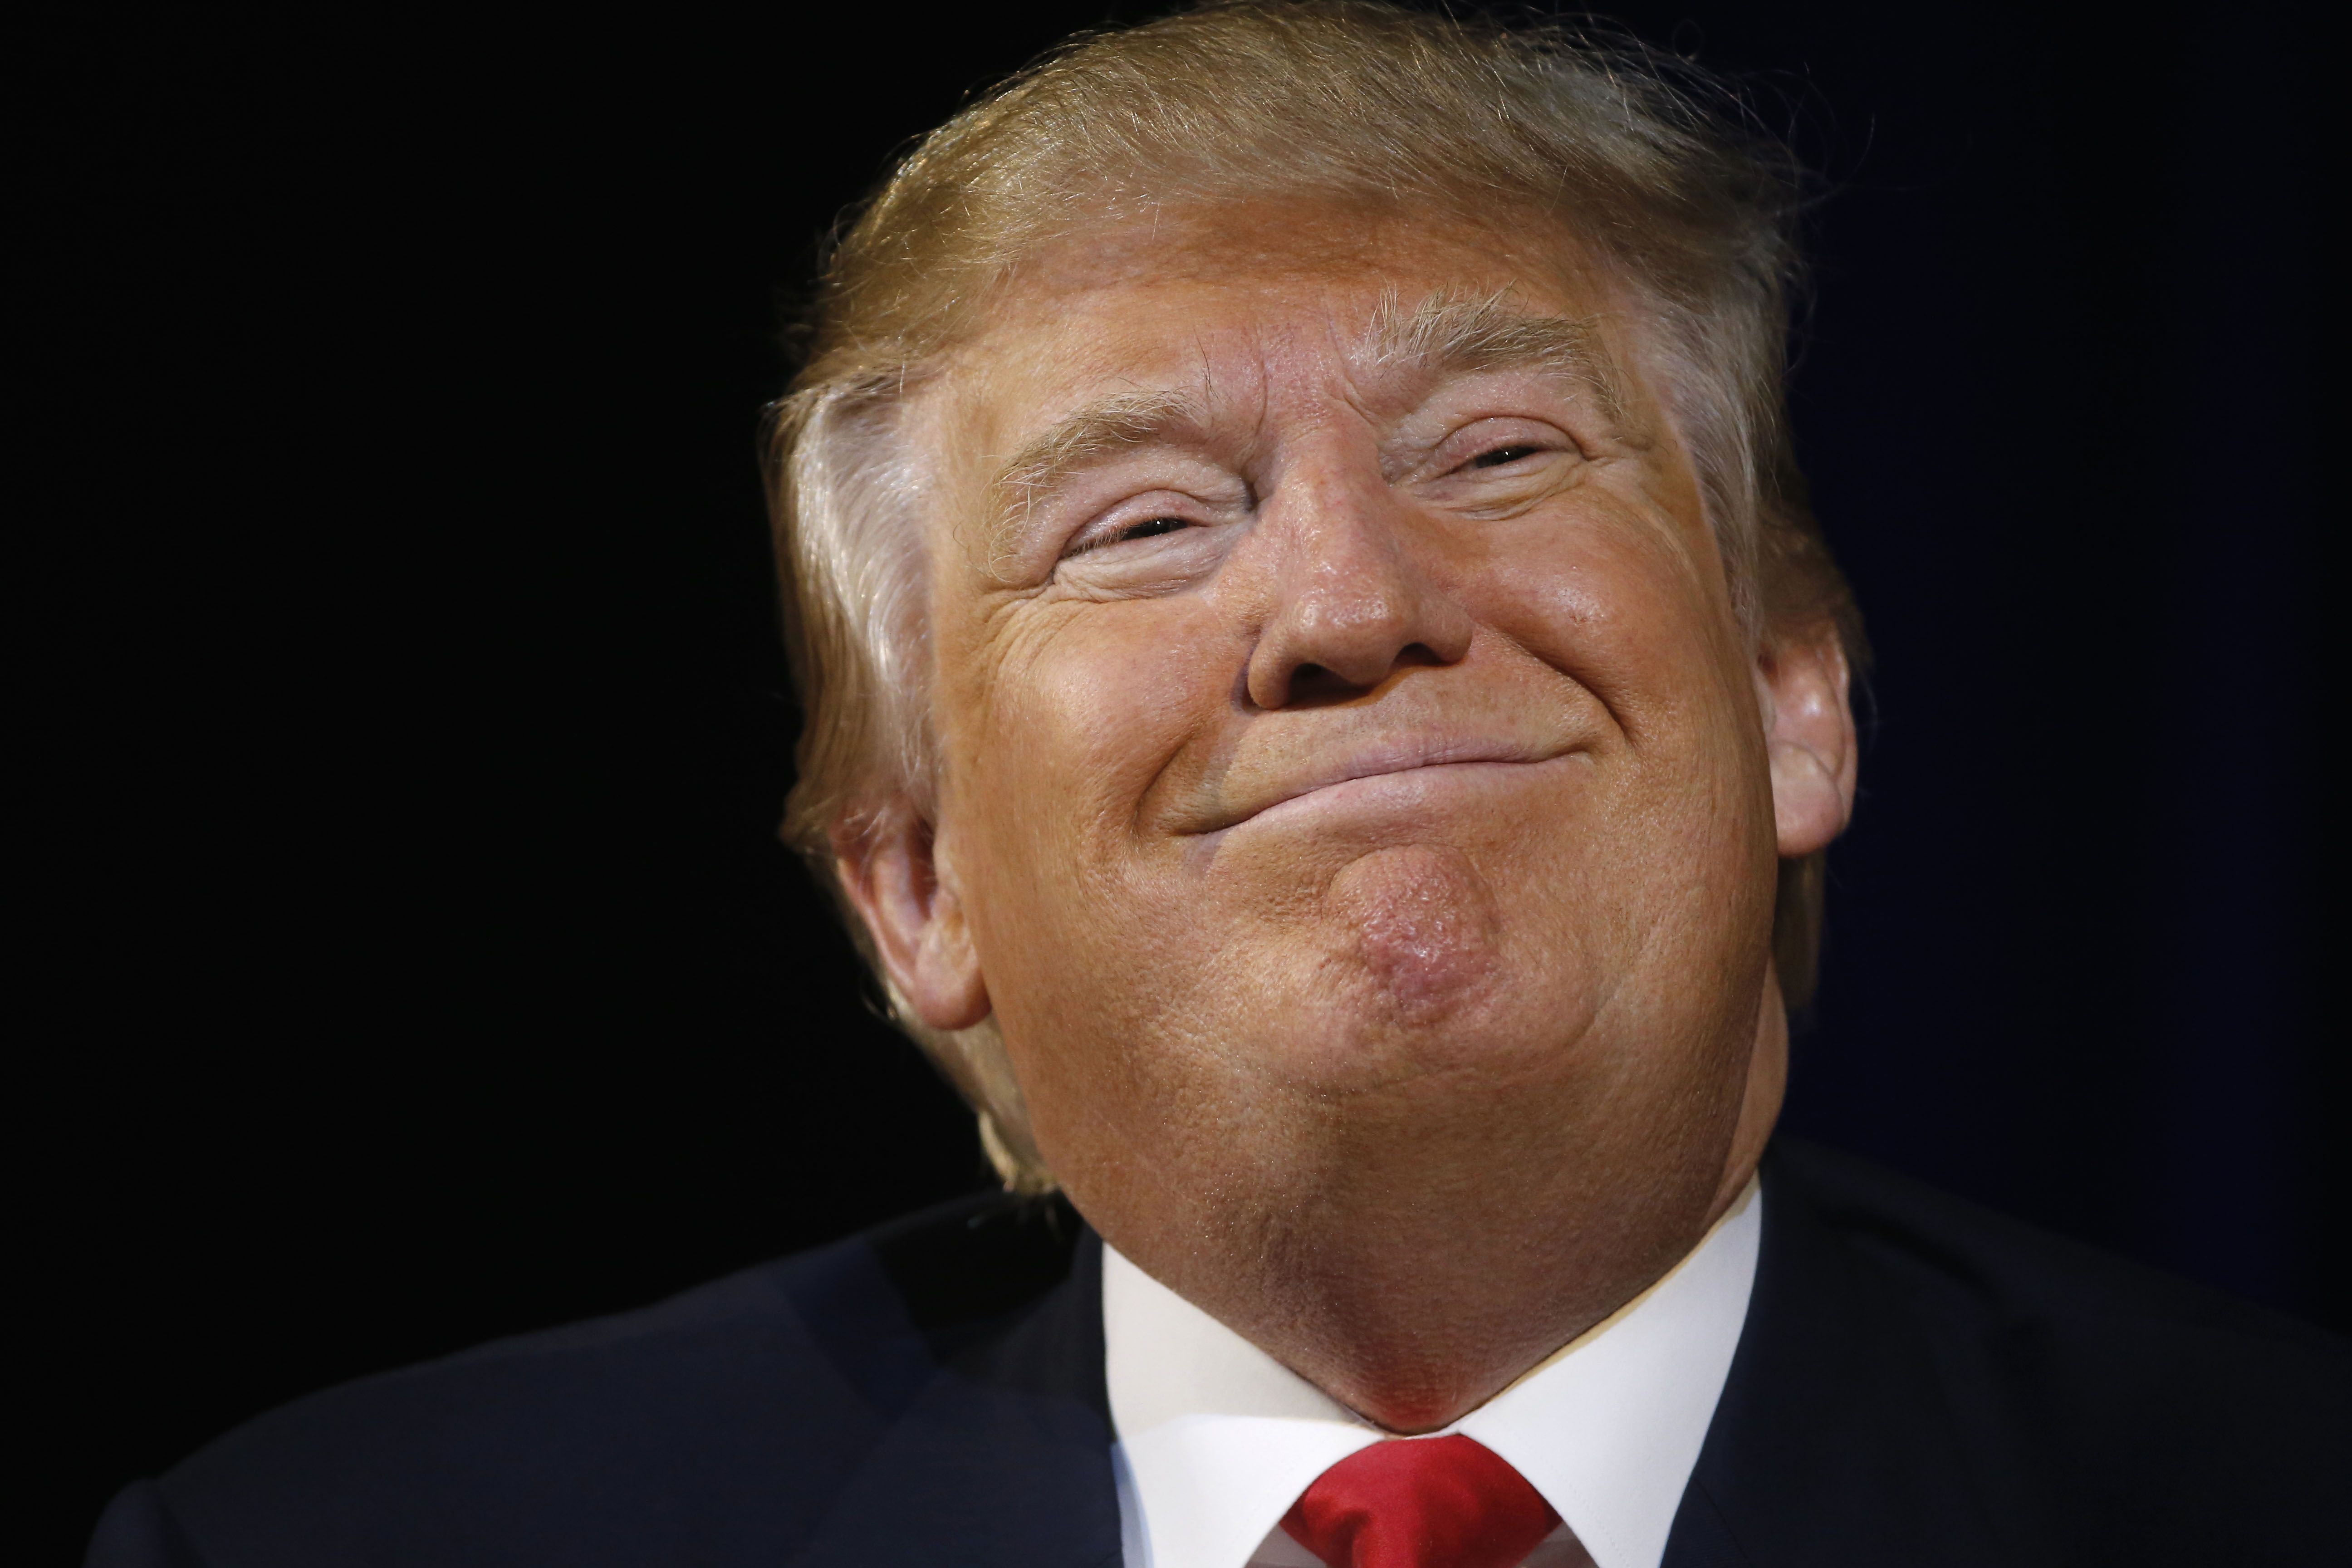 Republican presidential candidate Donald Trump smiles during a campaign stop, Wednesday, Feb. 17, 2016, in Bluffton, S.C. (AP Photo/Matt Rourke)